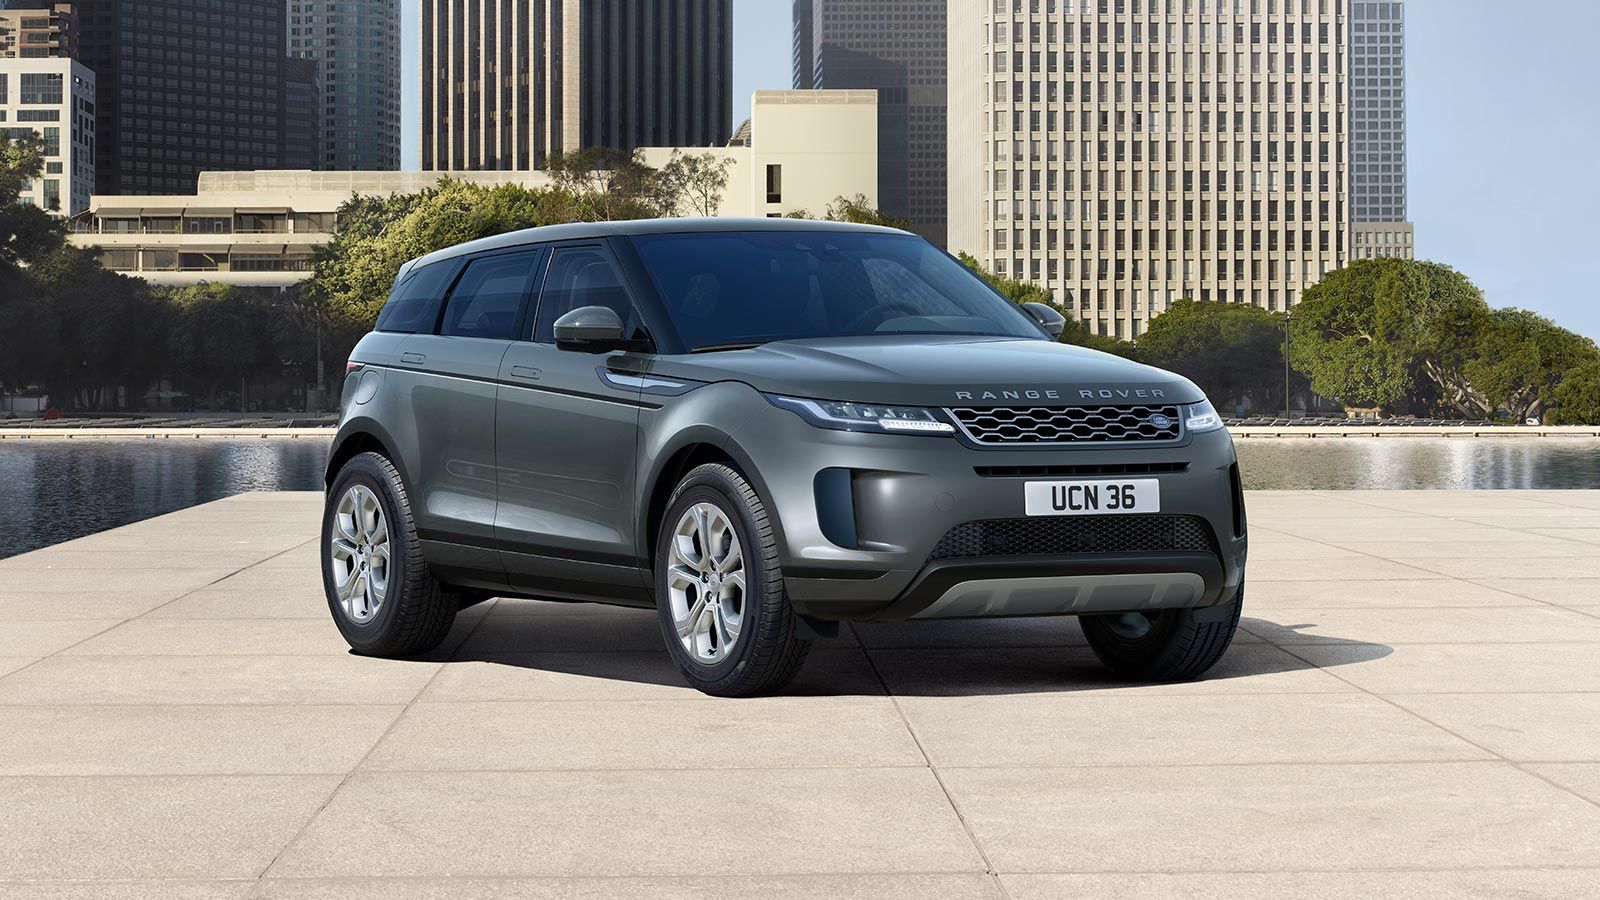 Range Rover Evoque Compact SUV Models Gallery Land